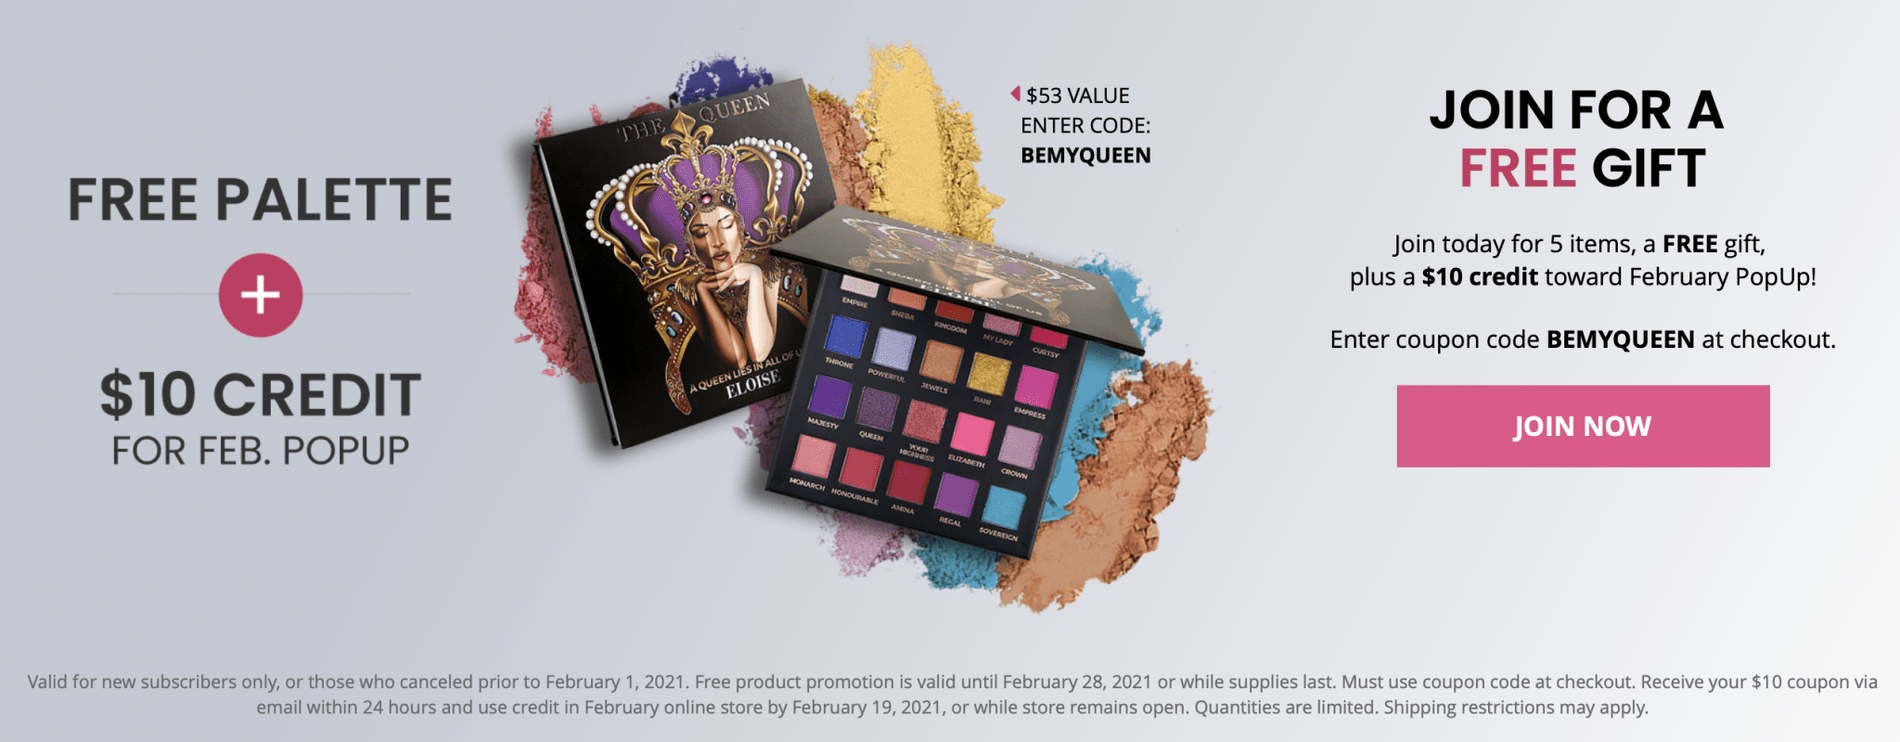 BOXYCHARM February 2021 Coupon Code – Free Gift with Purchase + $10 Pop-Up Credit!